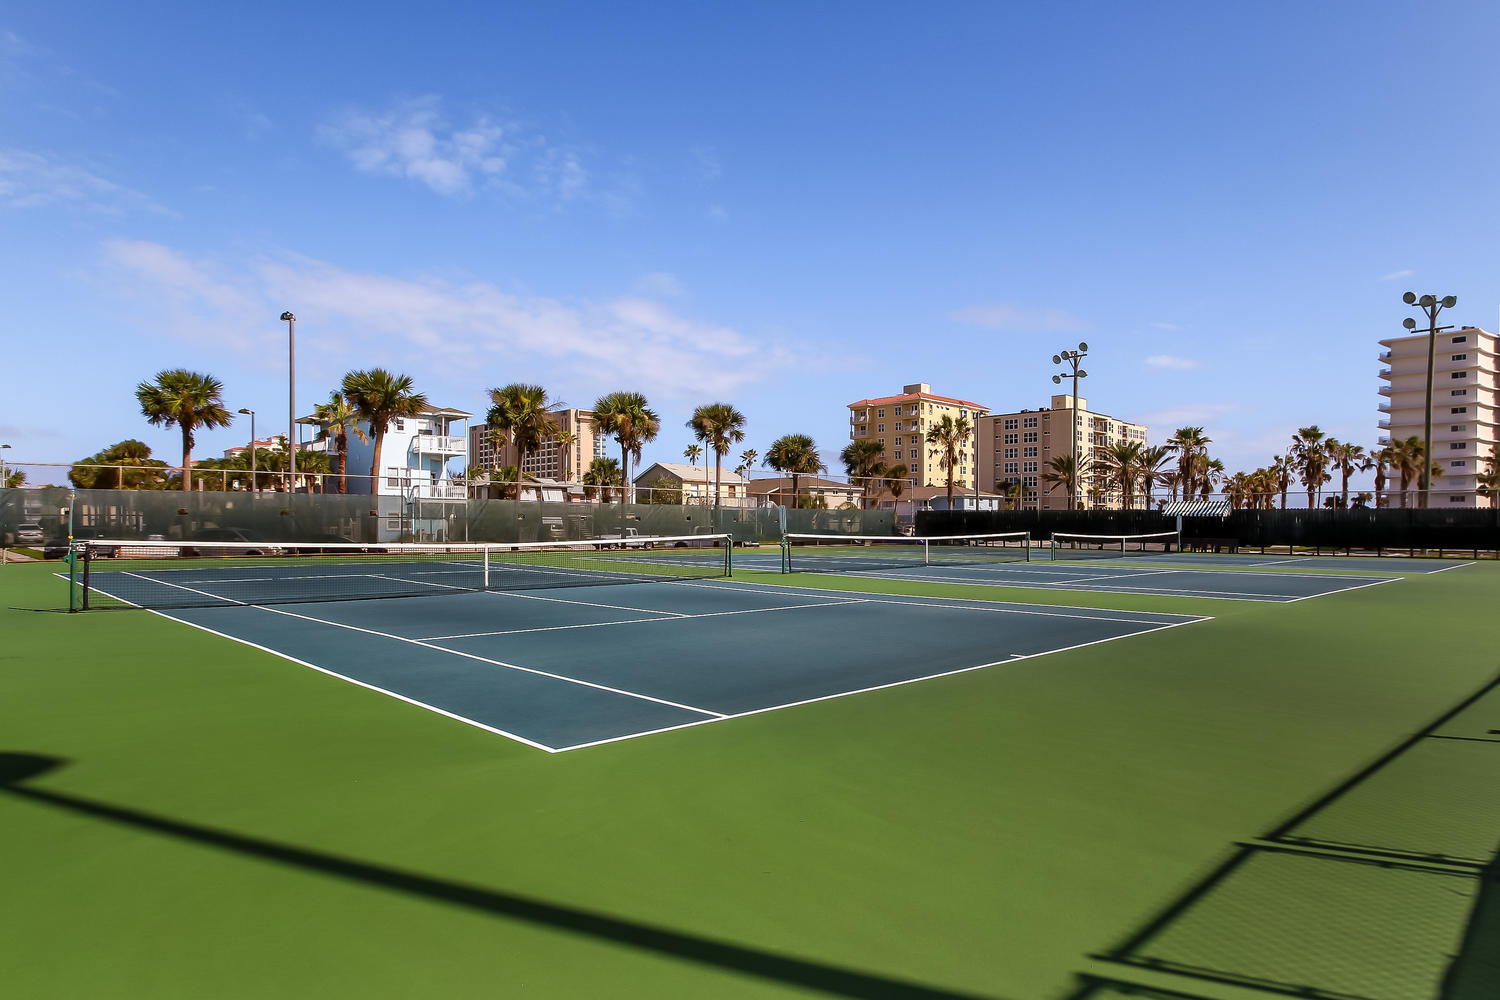 Nearby Tennis Courts